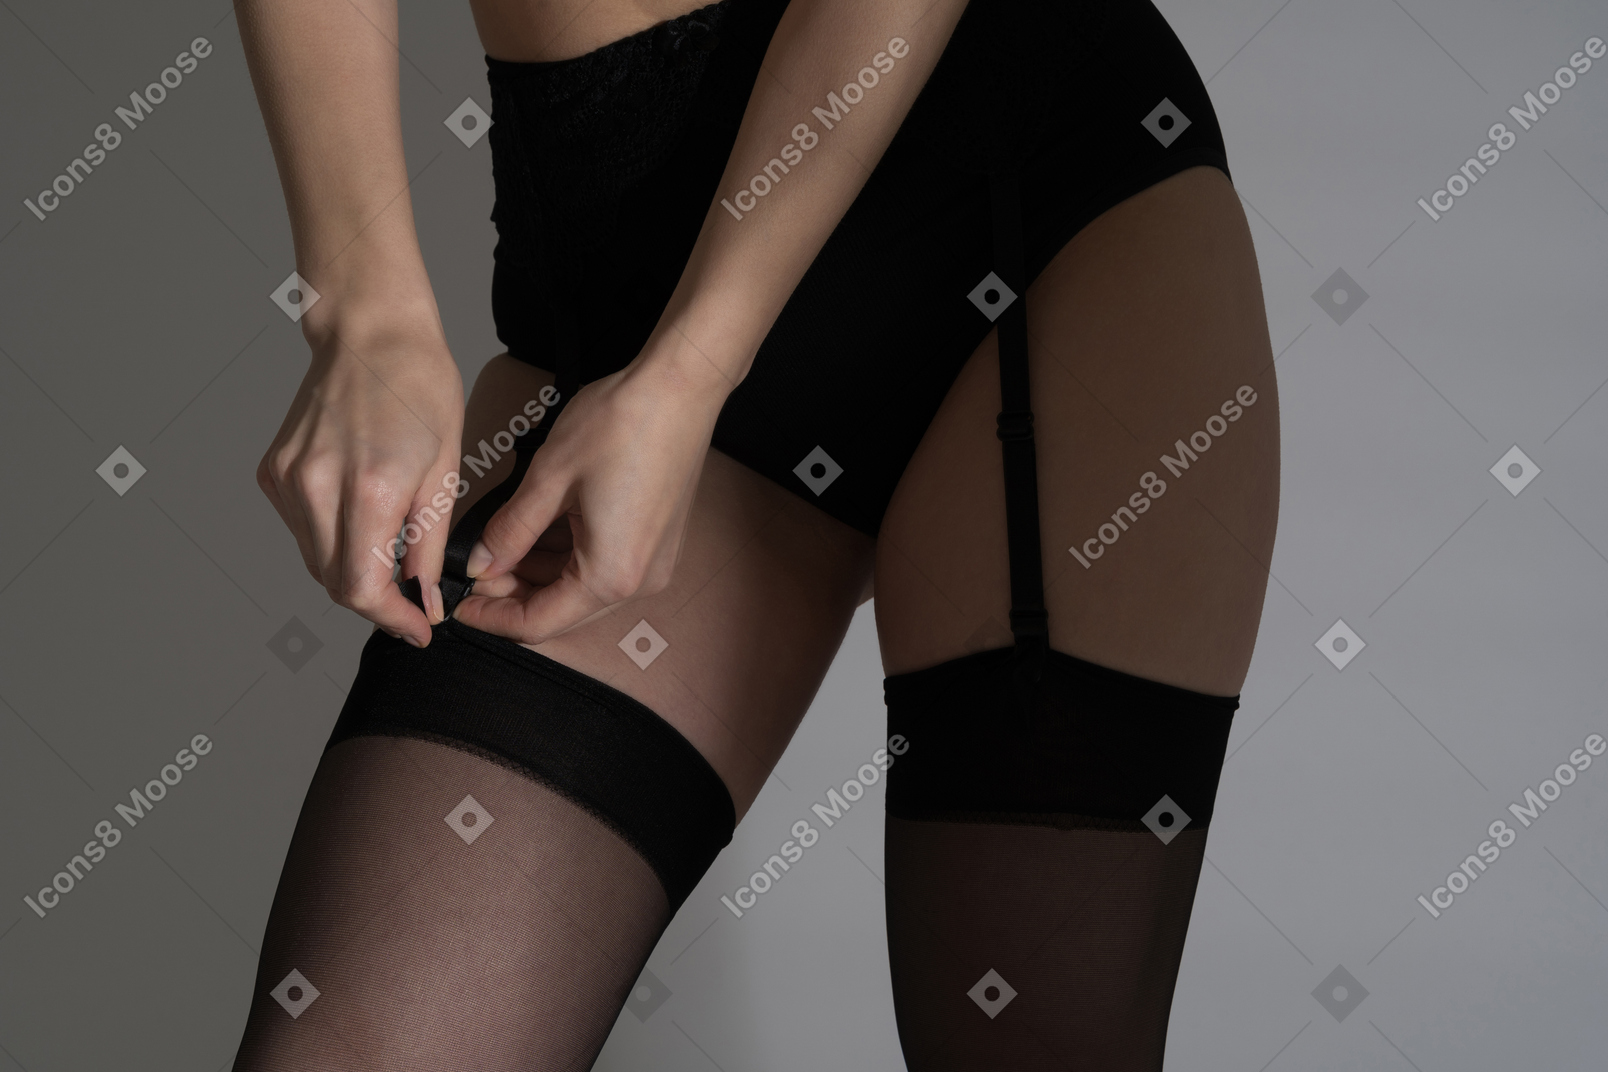 Female hips in thigh highs